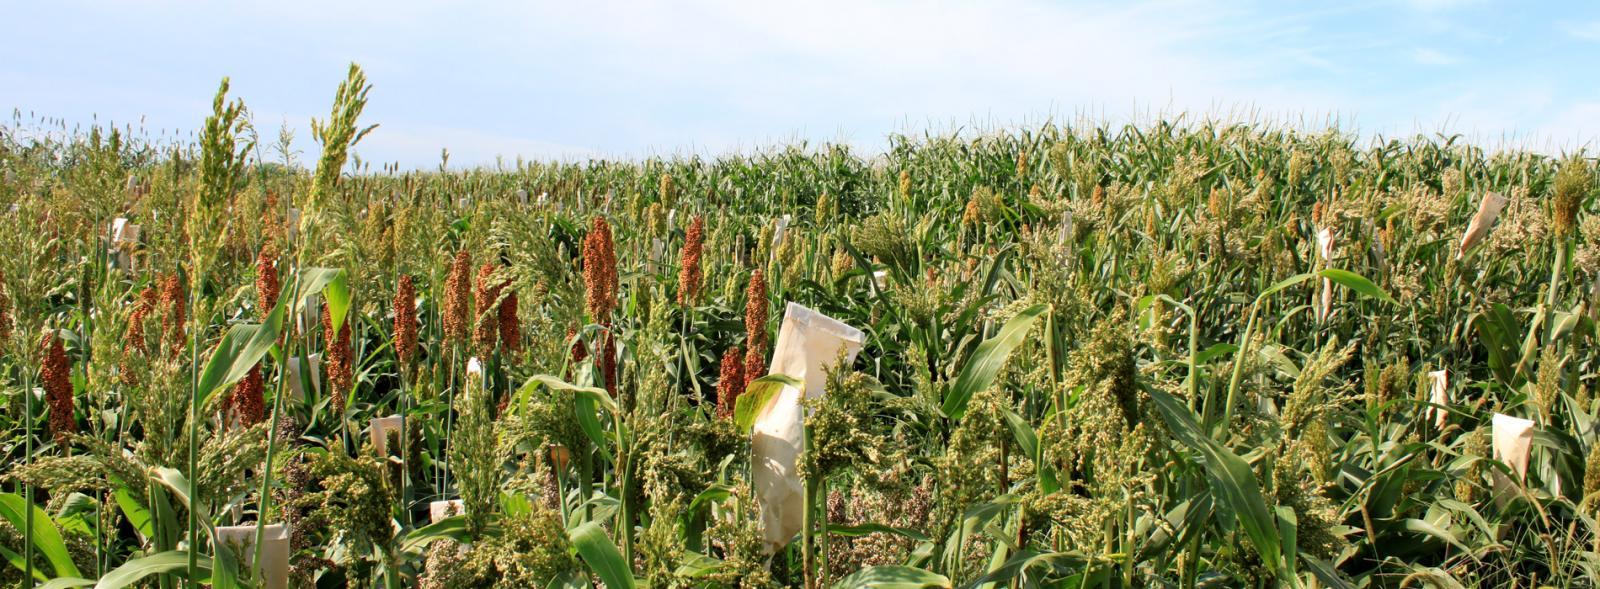 Sorghum field with weeds